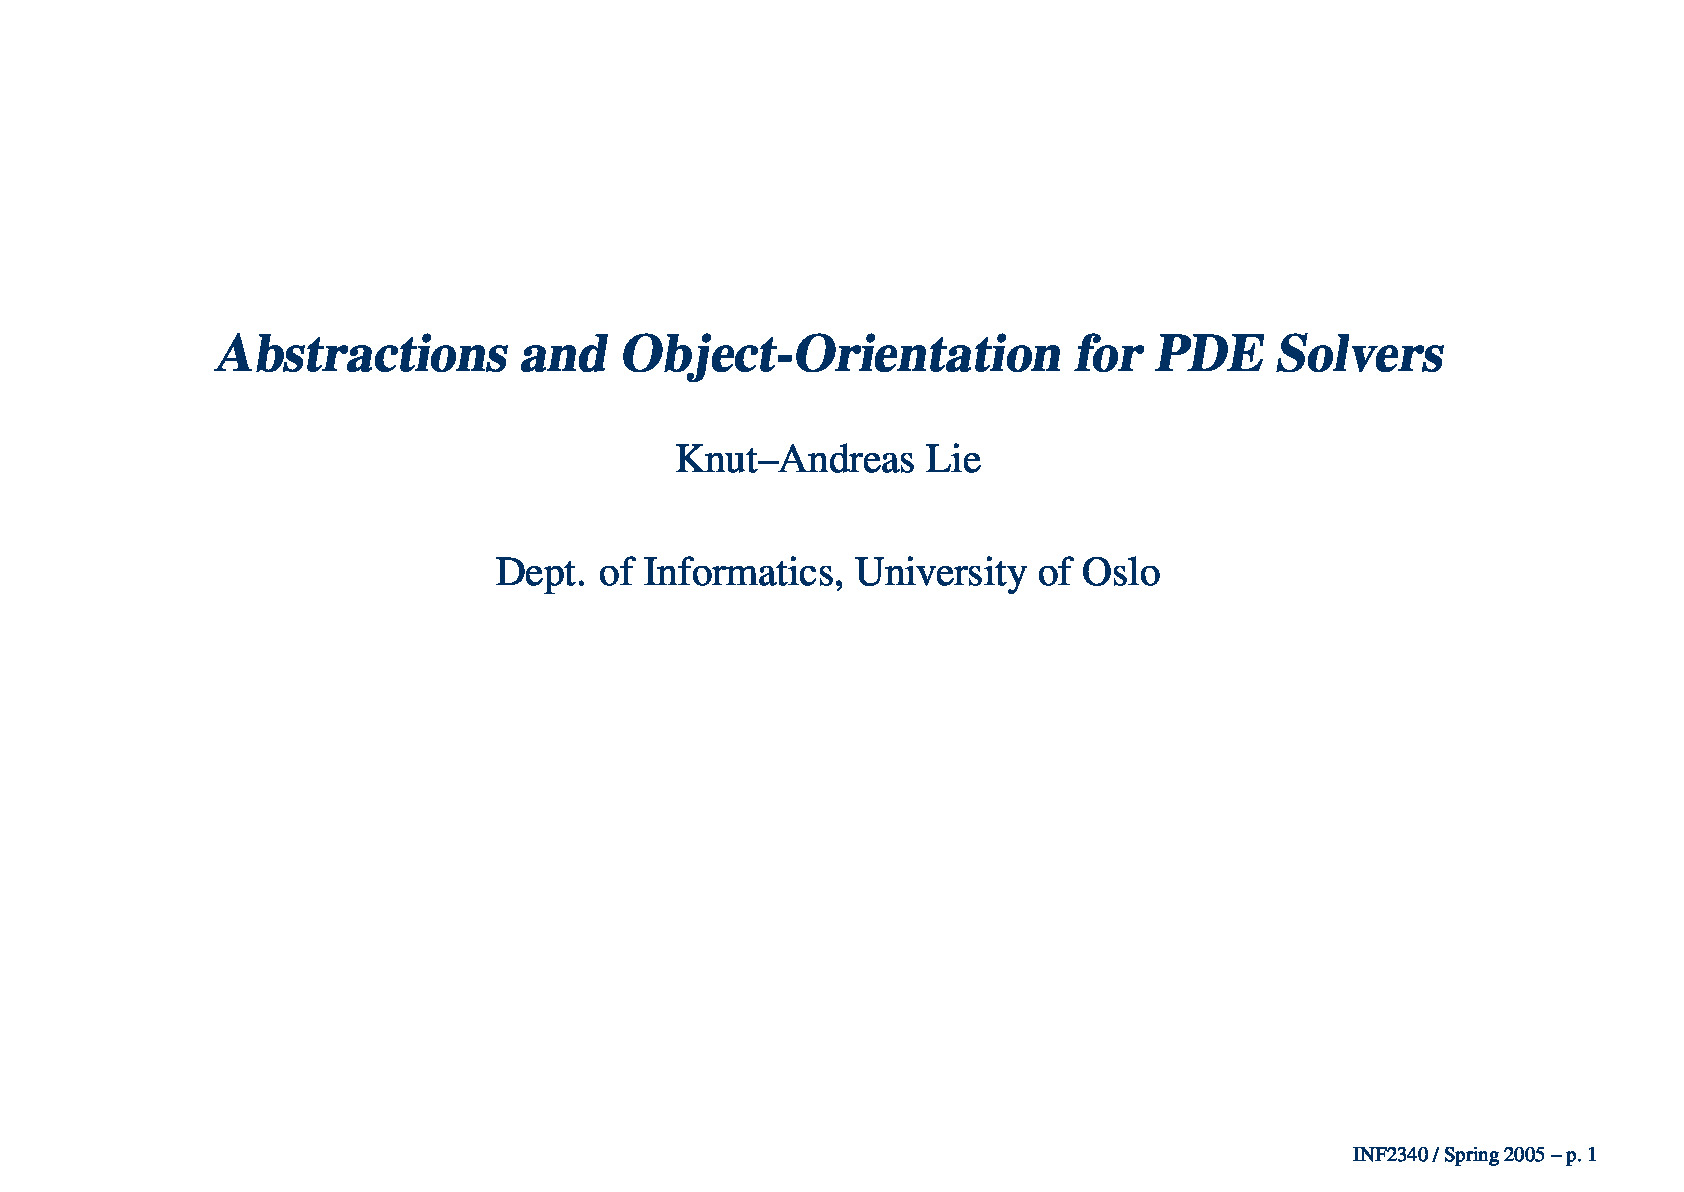 sim08 – Abstractions and Object Orientation for PDE Solvers